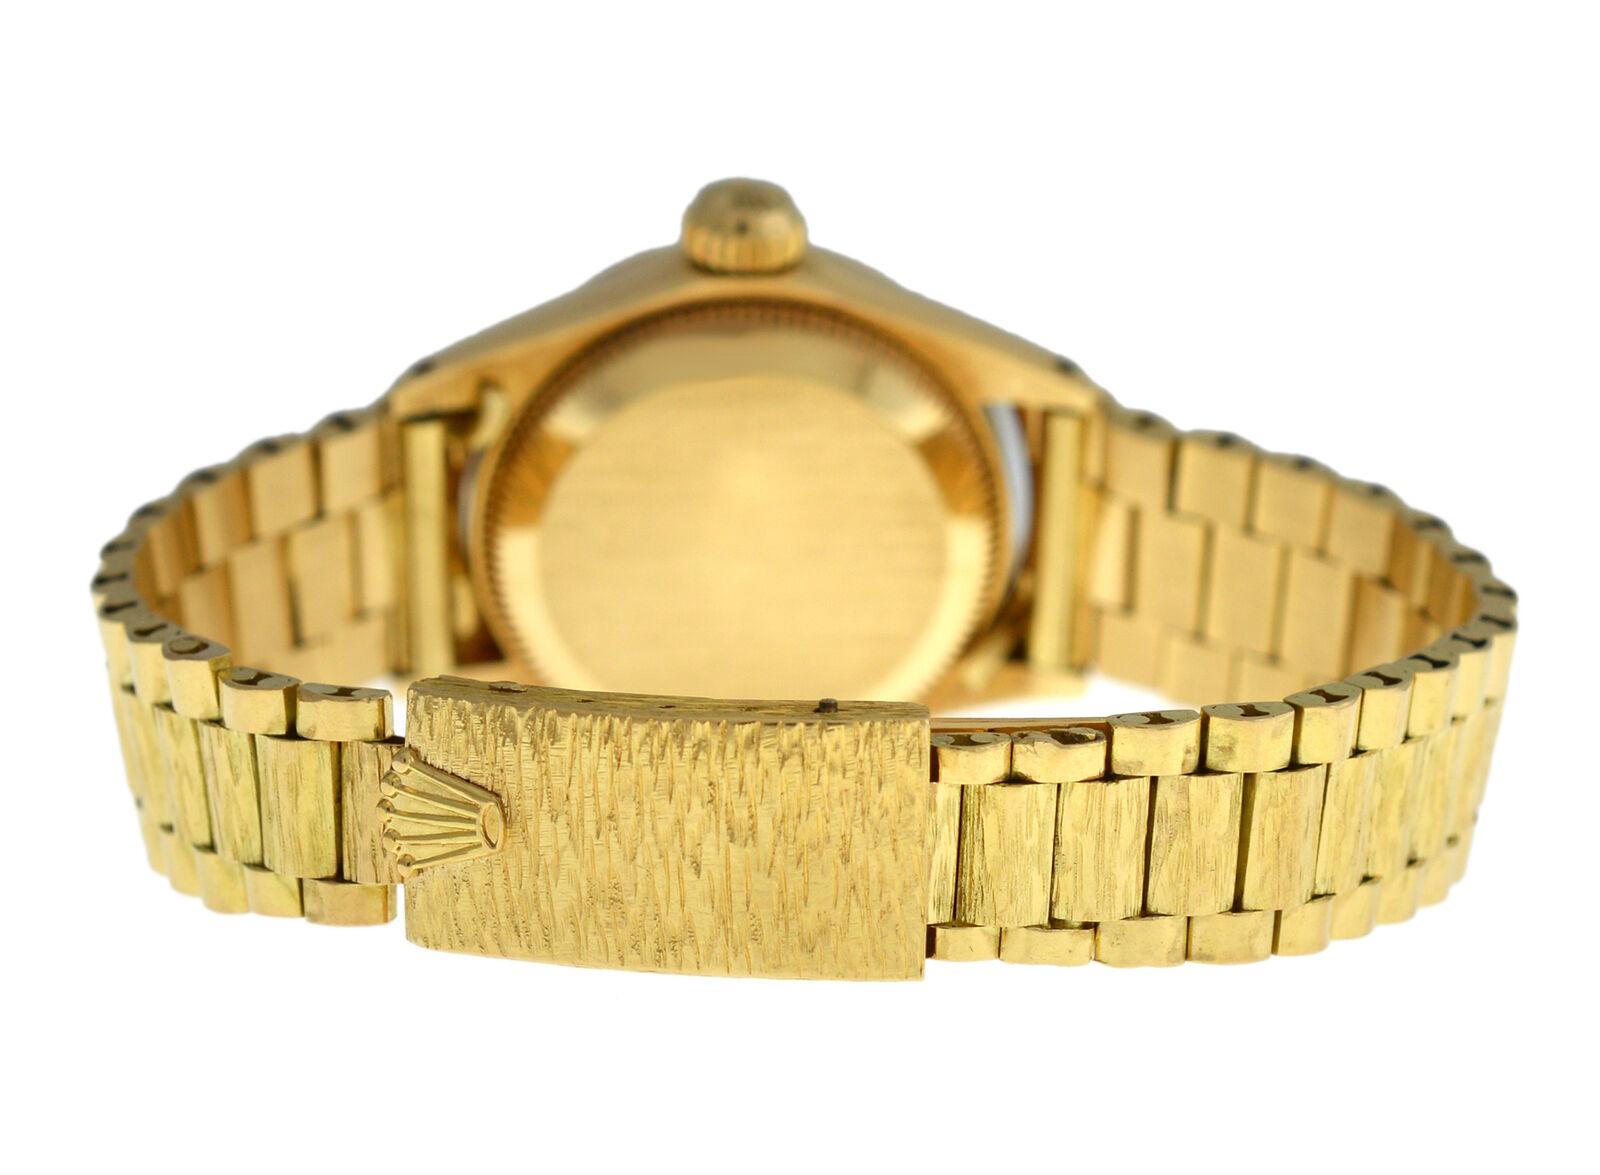 Ladies Rolex Oyster Perpetual Date Just 6701 18 Karat Yellow Gold Watch 1